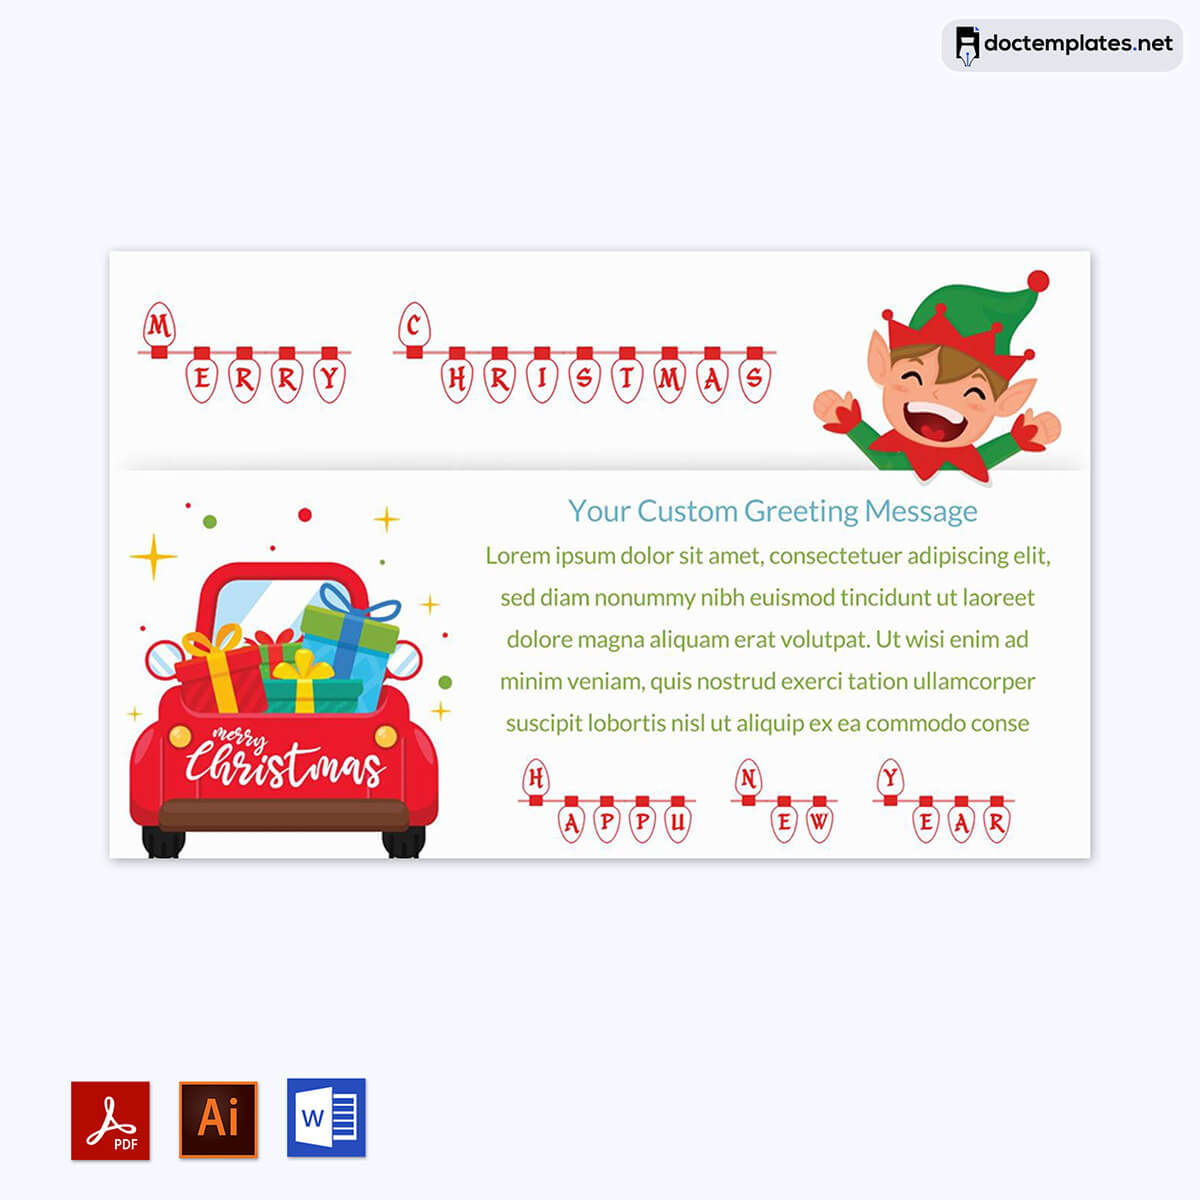 Image of Holiday Voucher Template Word
Holiday Voucher Template Word
